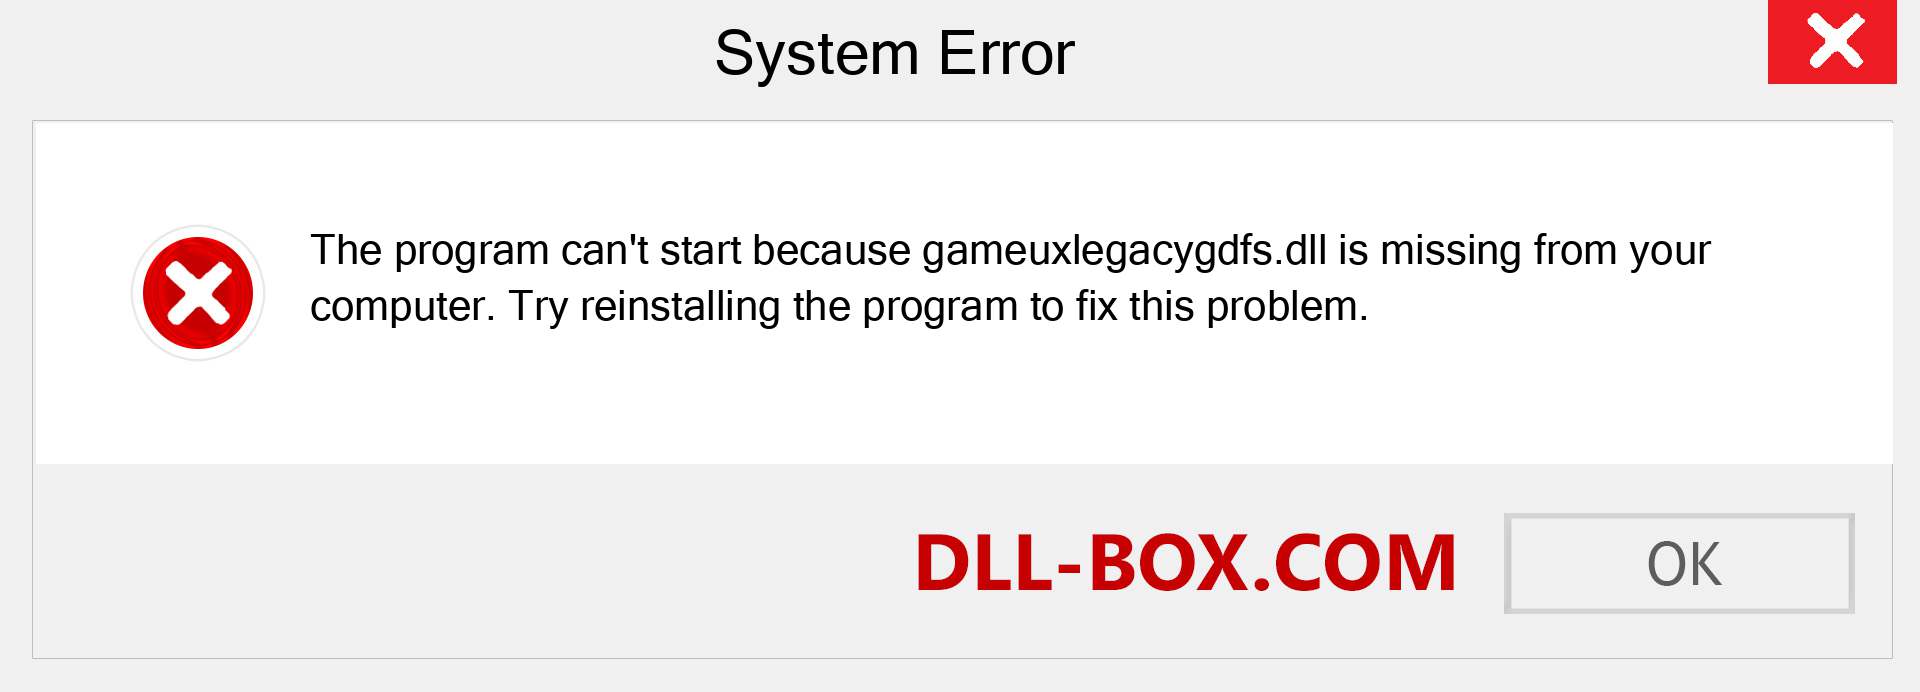  gameuxlegacygdfs.dll file is missing?. Download for Windows 7, 8, 10 - Fix  gameuxlegacygdfs dll Missing Error on Windows, photos, images